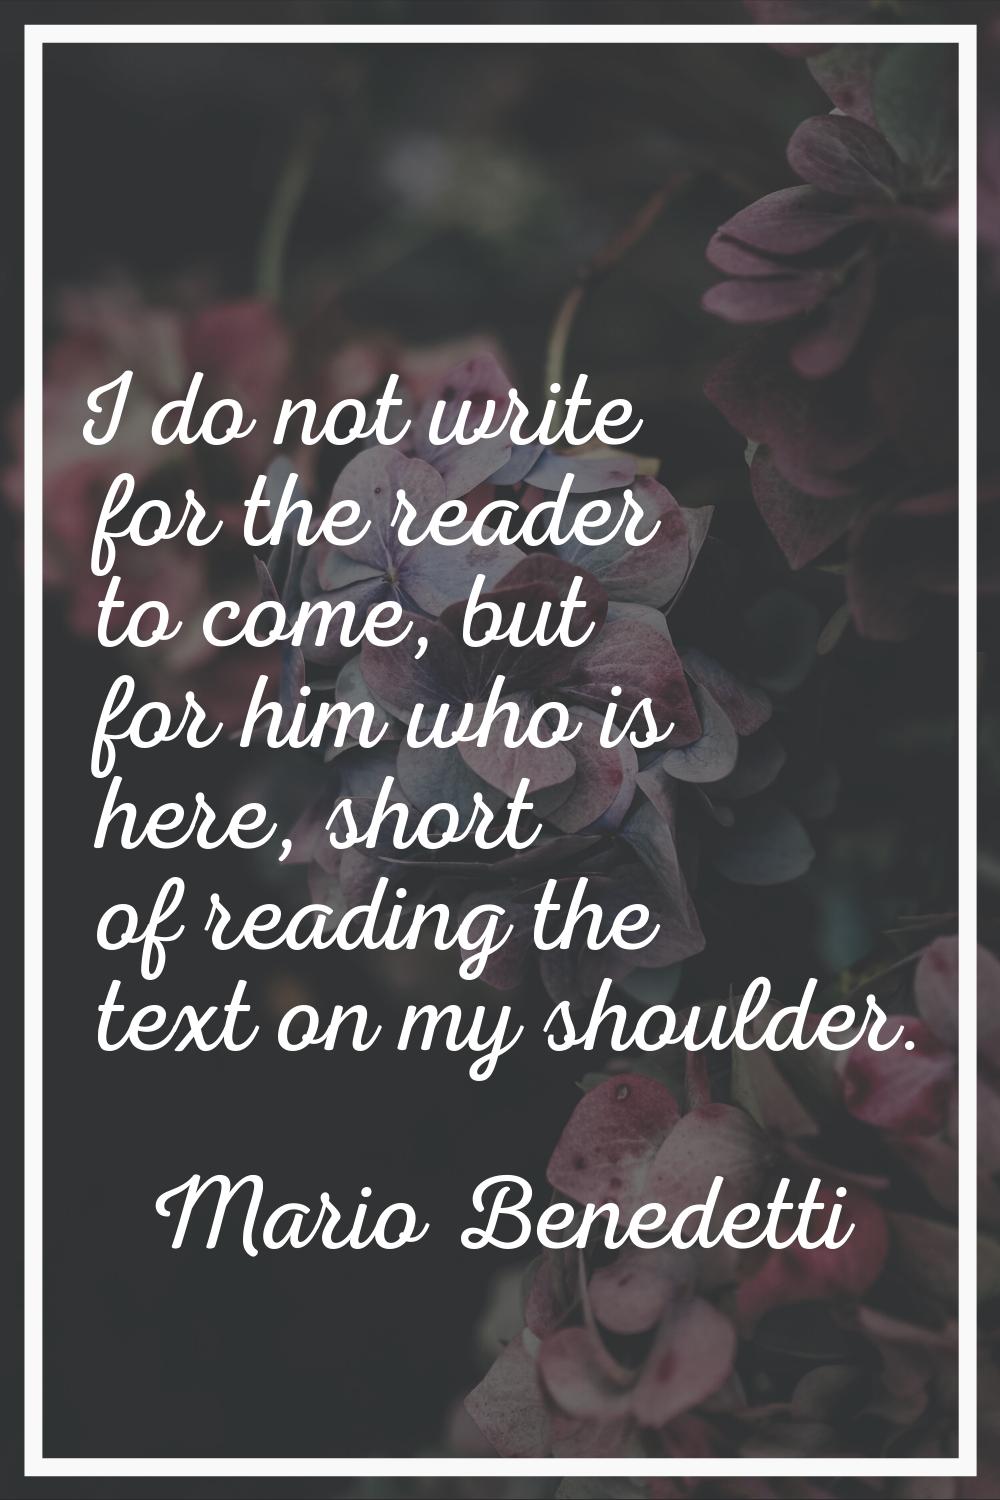 I do not write for the reader to come, but for him who is here, short of reading the text on my sho